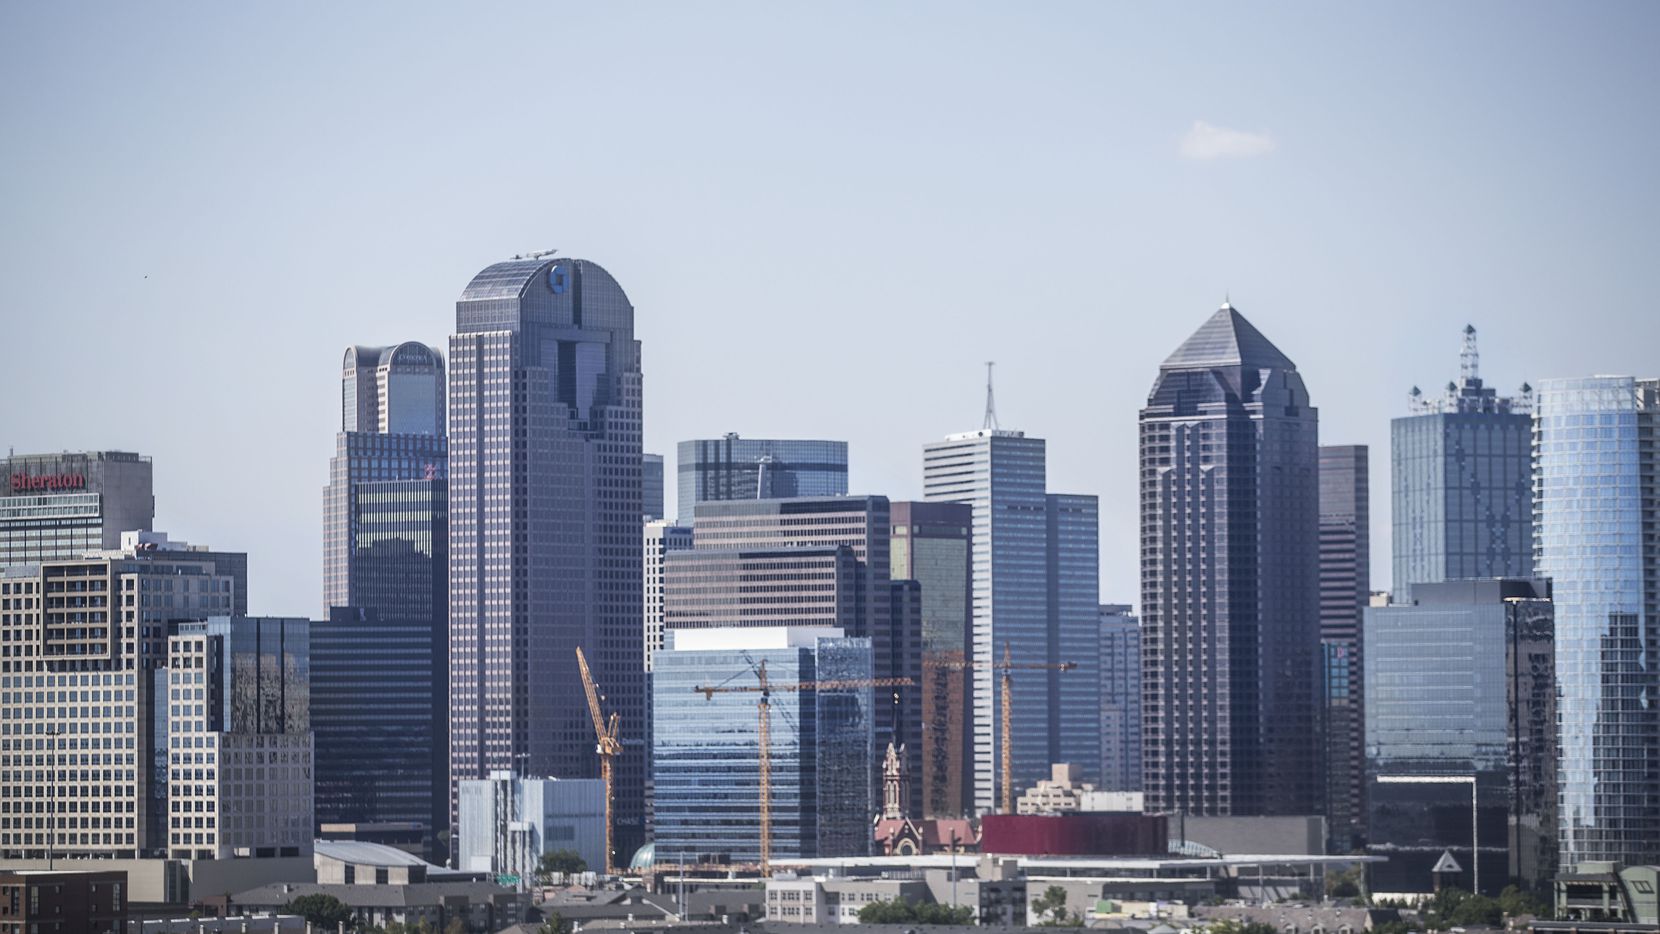 Amazon focused on the downtown Dallas area for its new headquarters location.